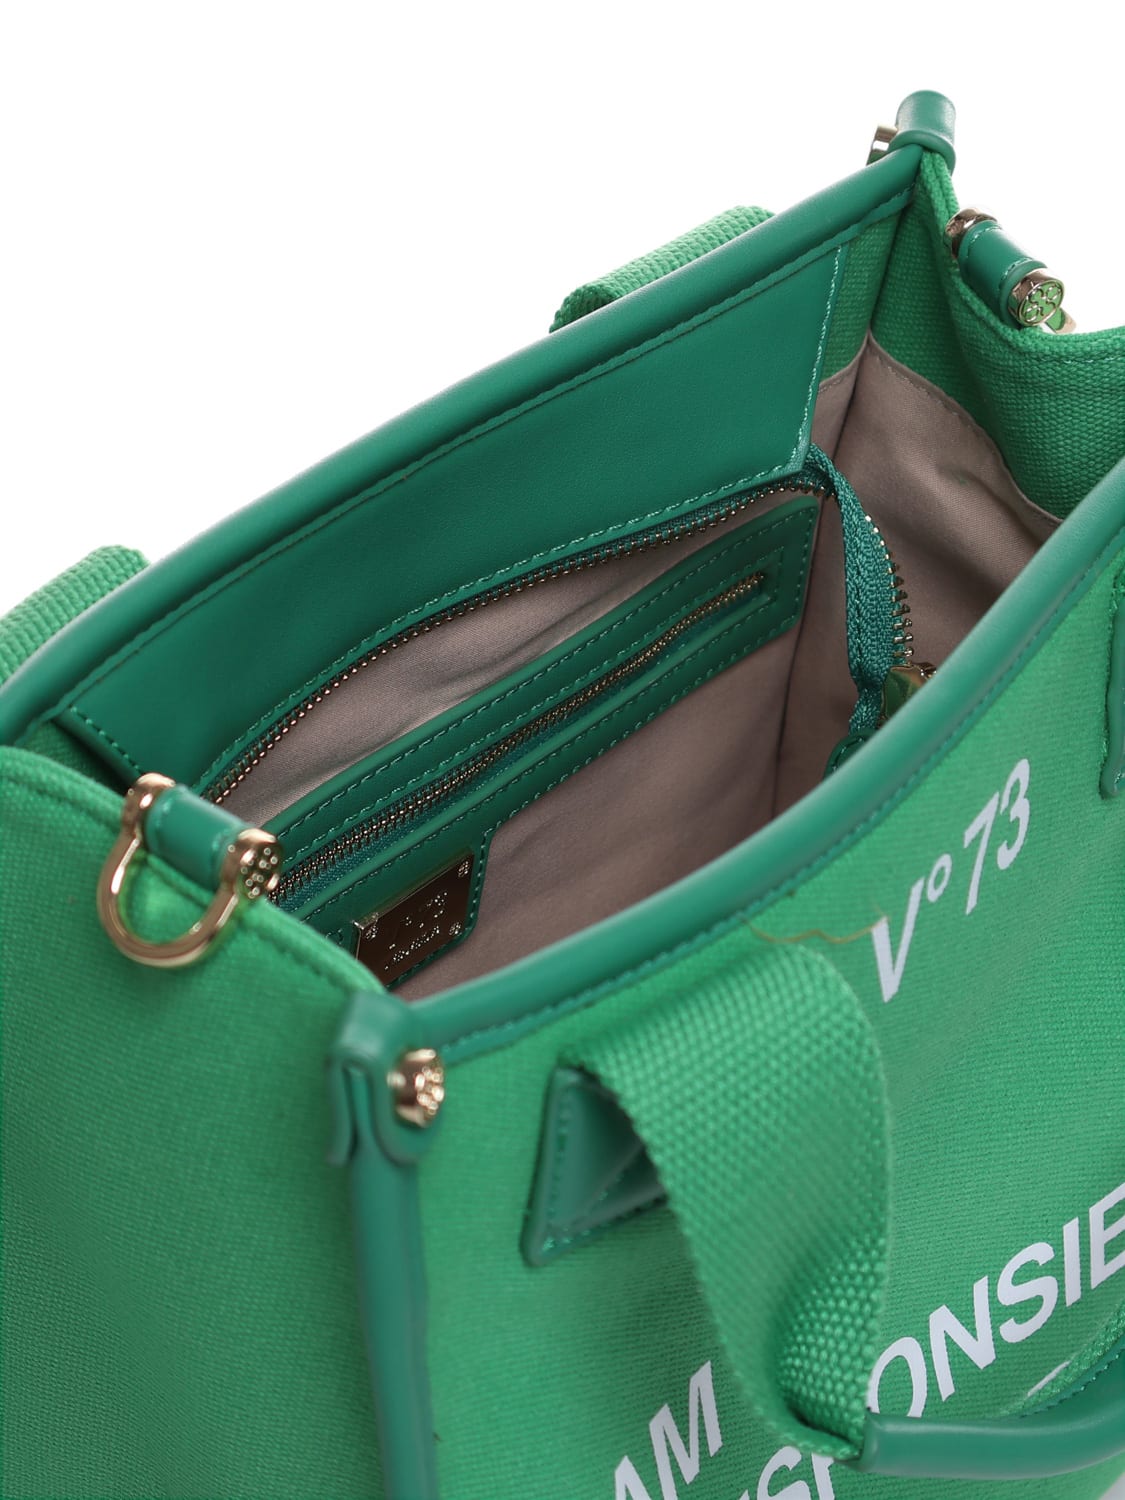 Shop V73 Responsibility Tote Bag In Canvas And Eco-leather In Green